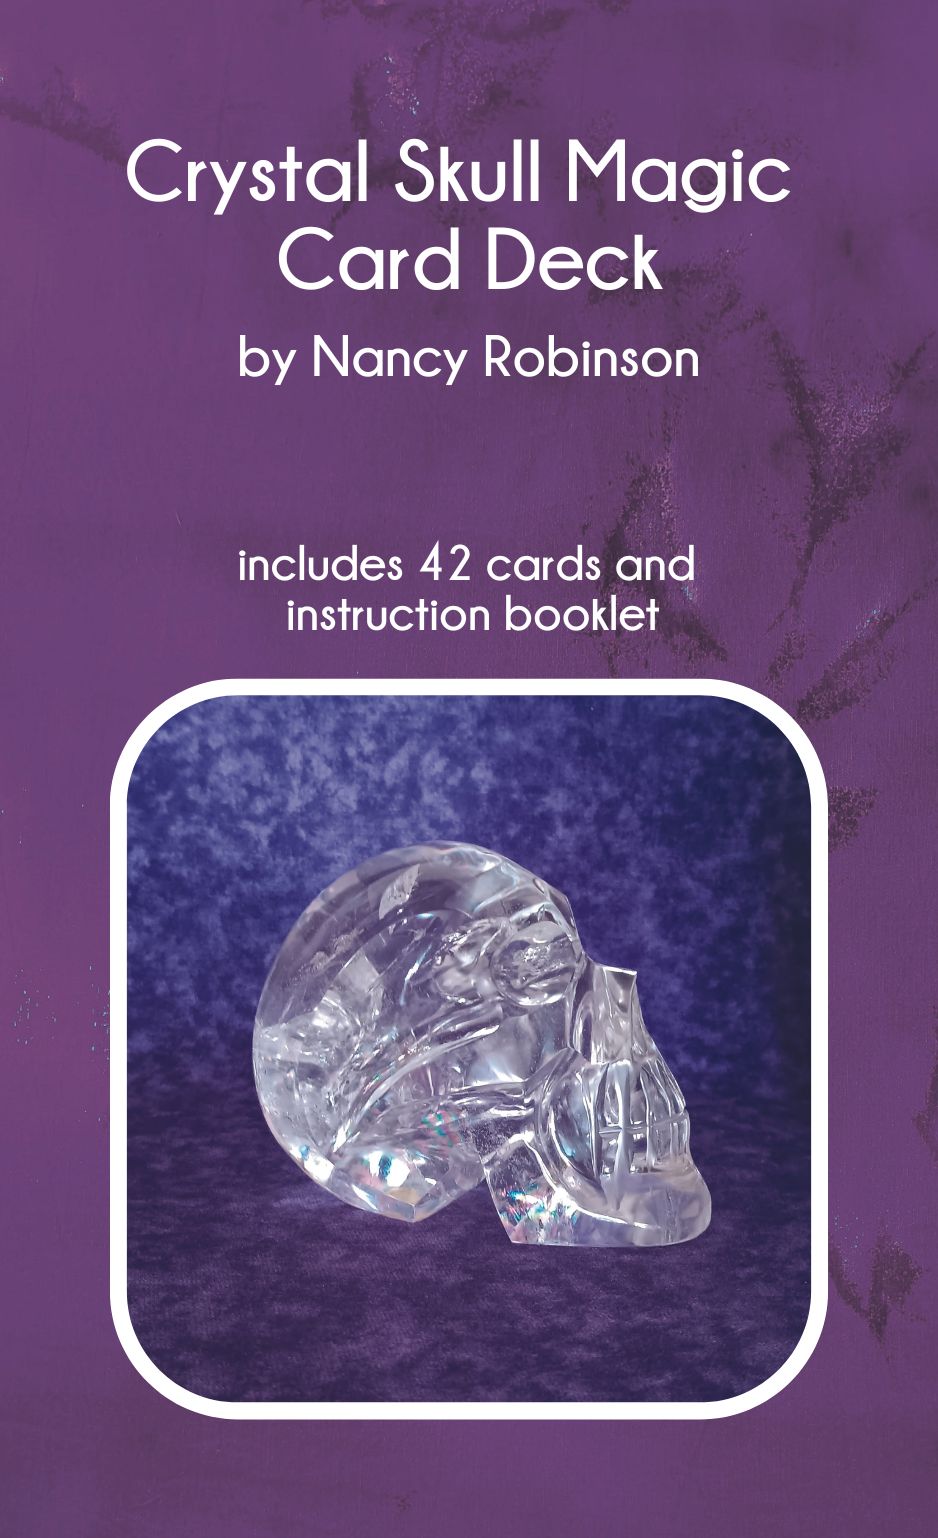 Crystal Skull Magic Card Deck, 42 Cards, 3x5, 31 Page Instruction Booklet, Packaged in Printed Tuckbox by Nancy Robinson